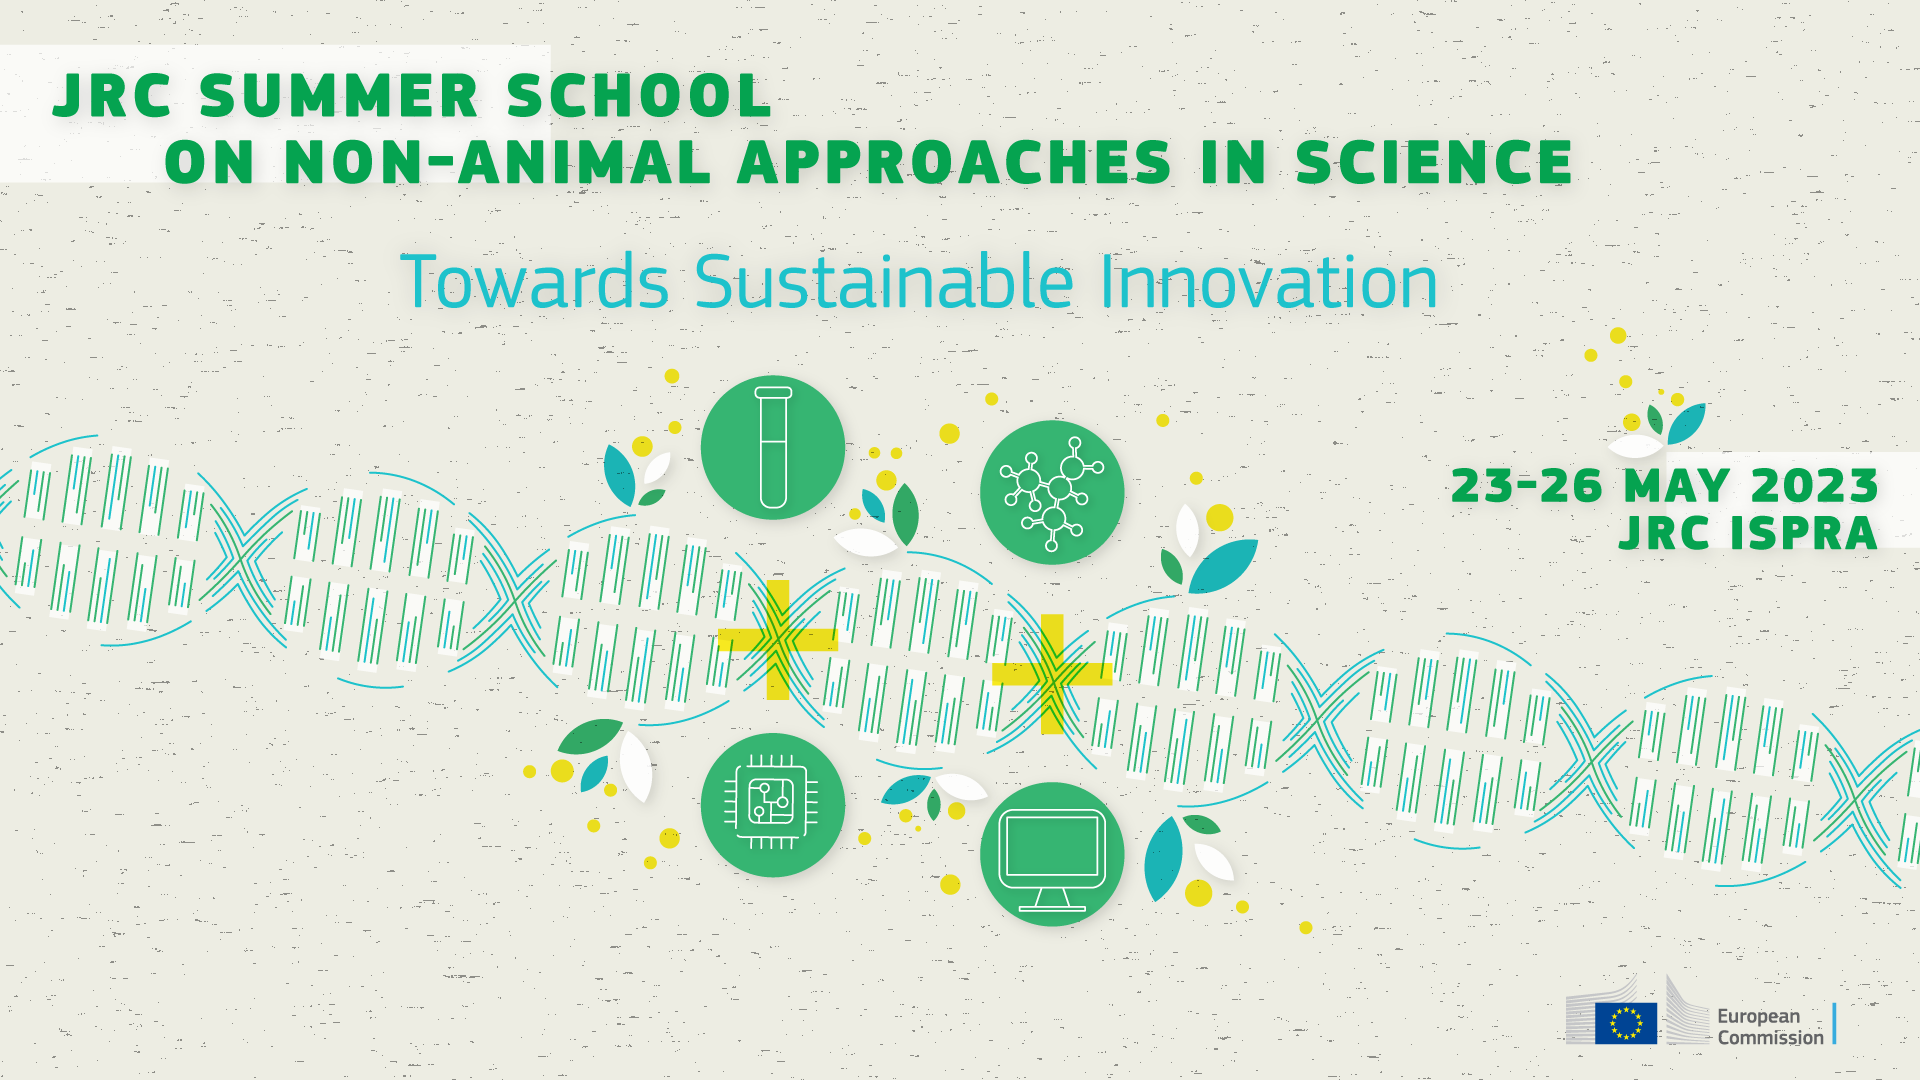 JRC Summer School on Non-Animal Approaches in Science 2023